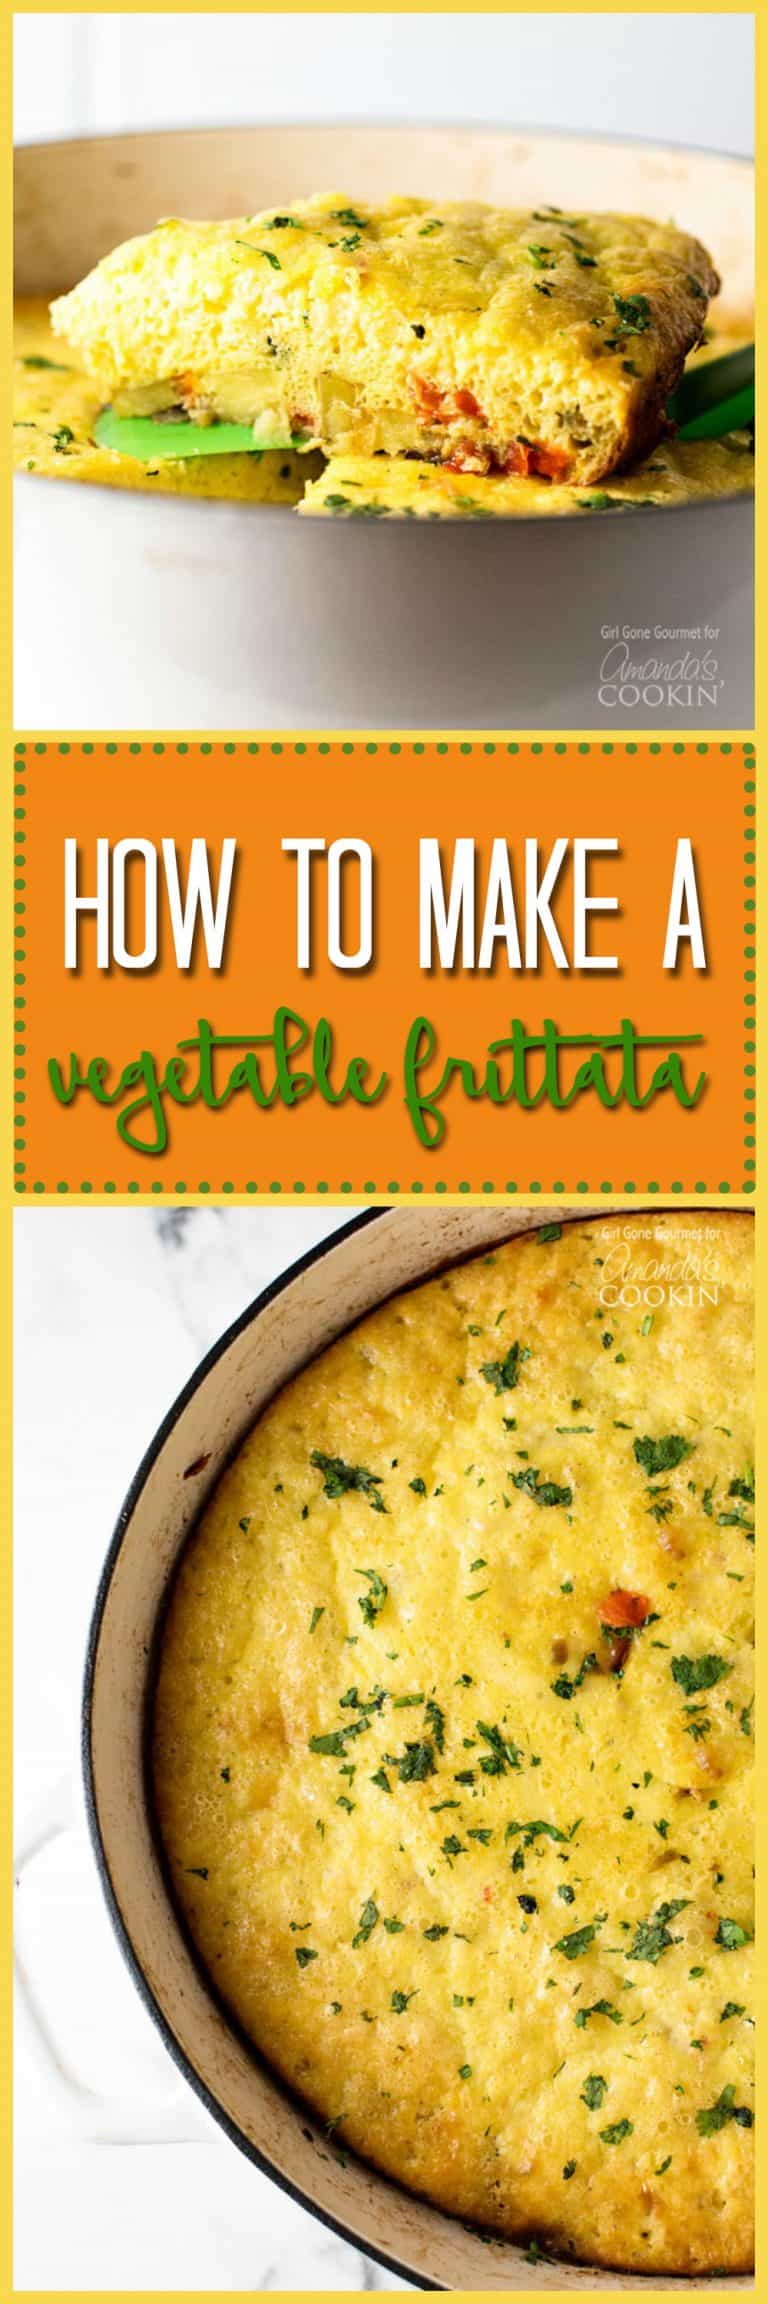 Vegetable Frittata: a delicious brunch recipe loaded with veggies & cheese